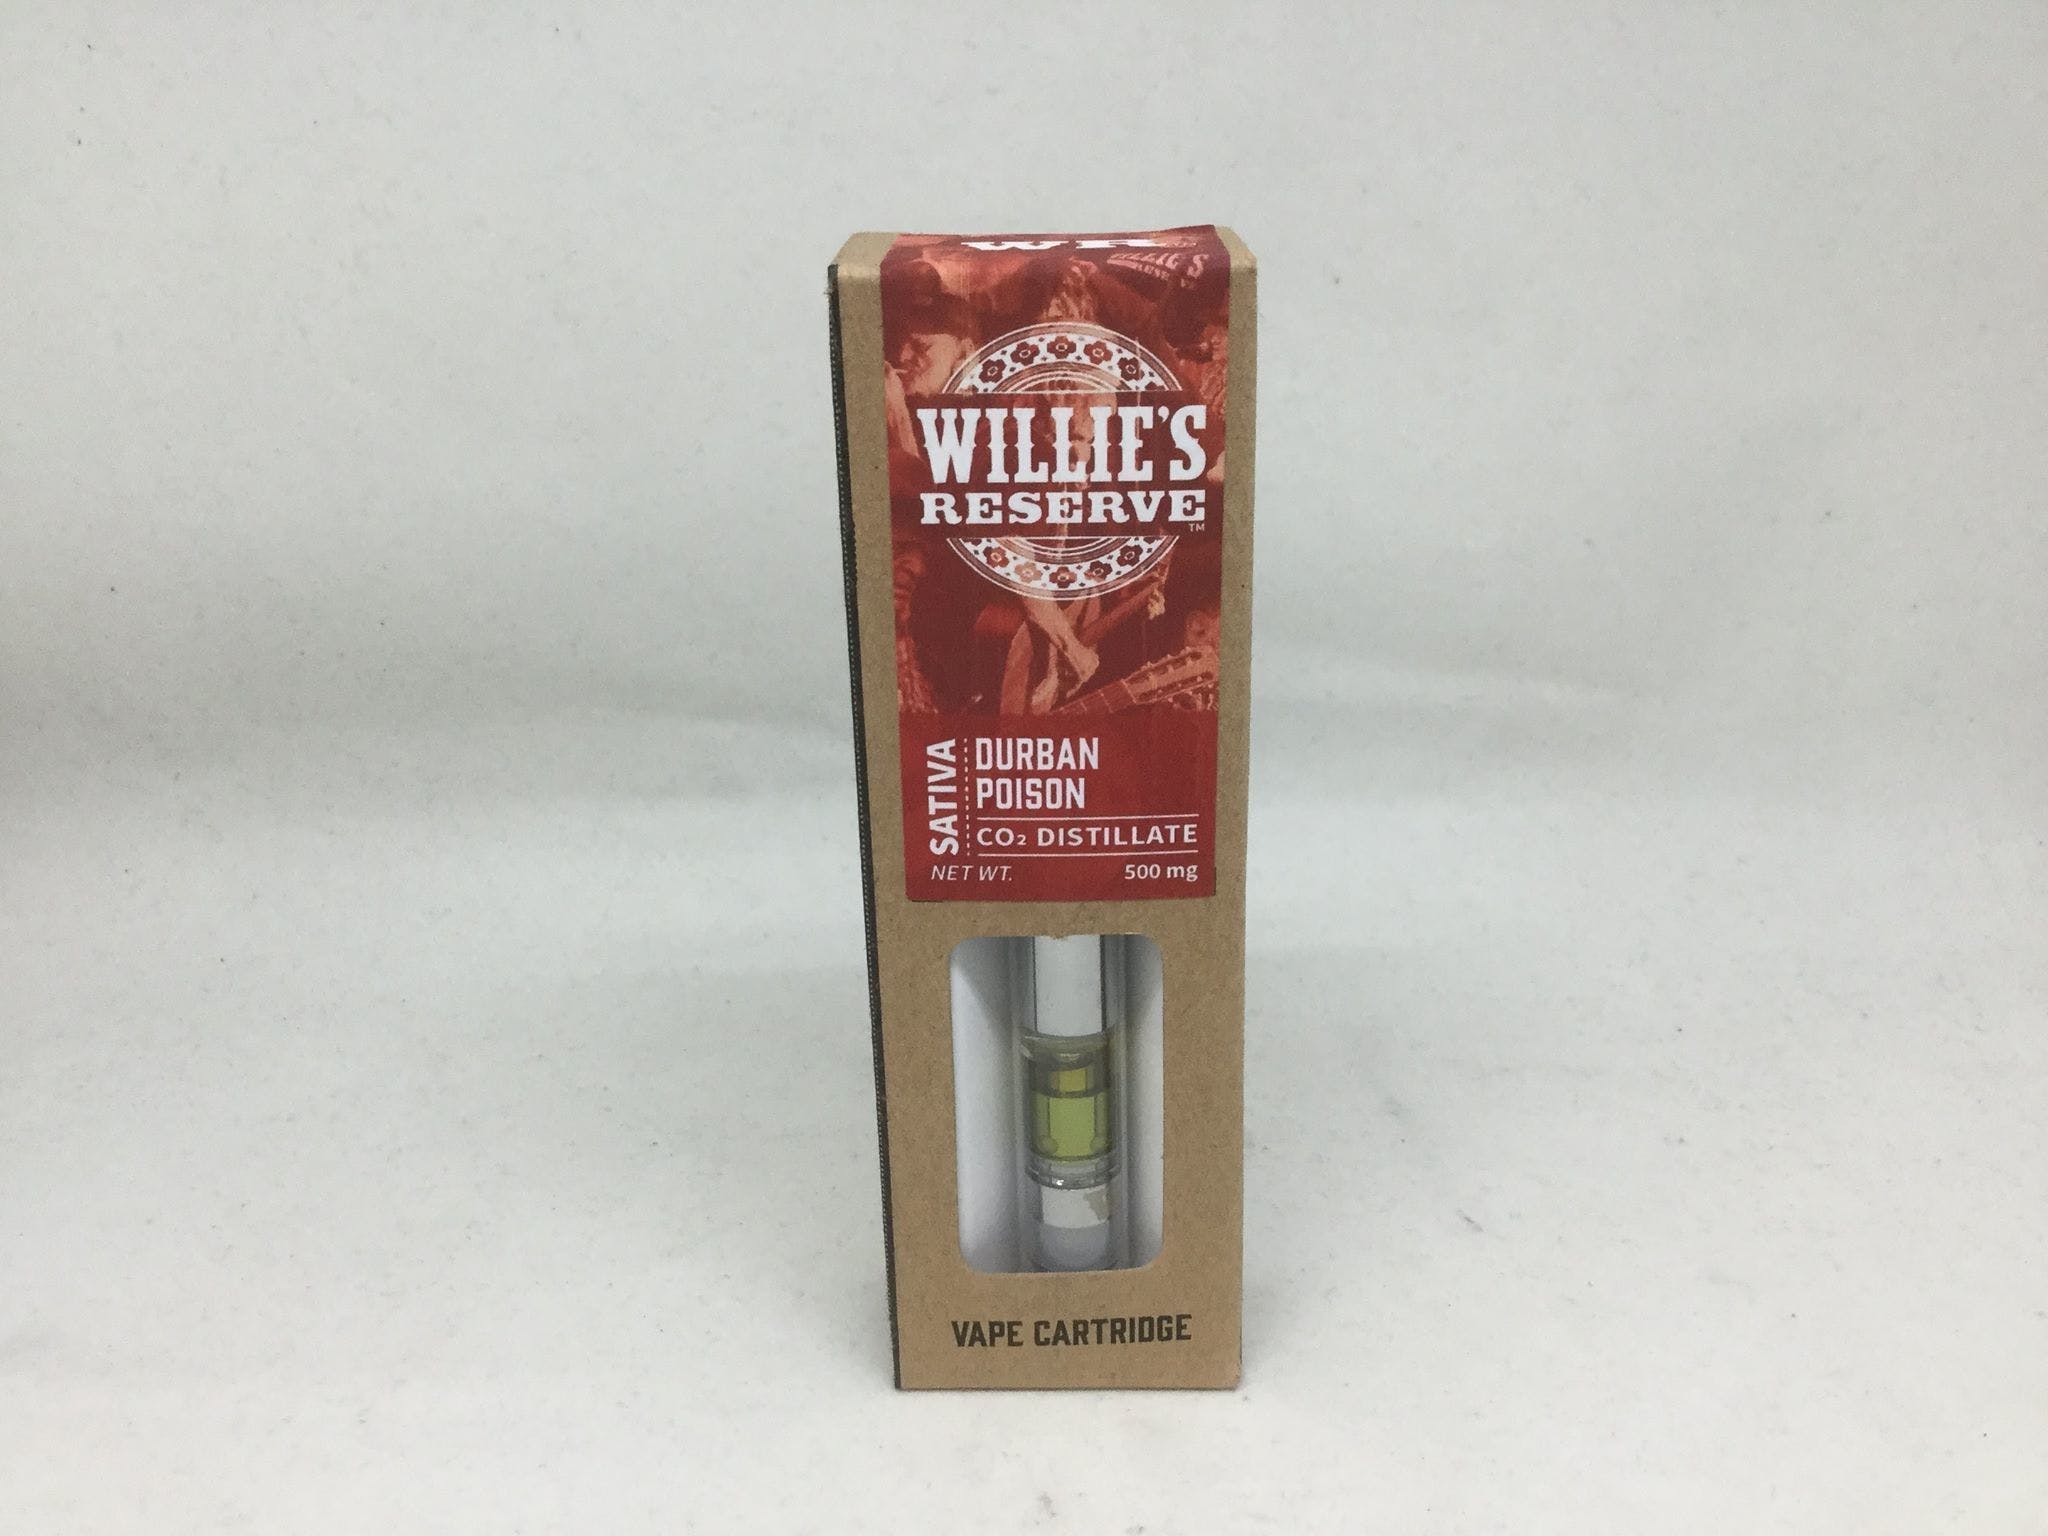 concentrate-willies-reserve-durban-poison-cartridge